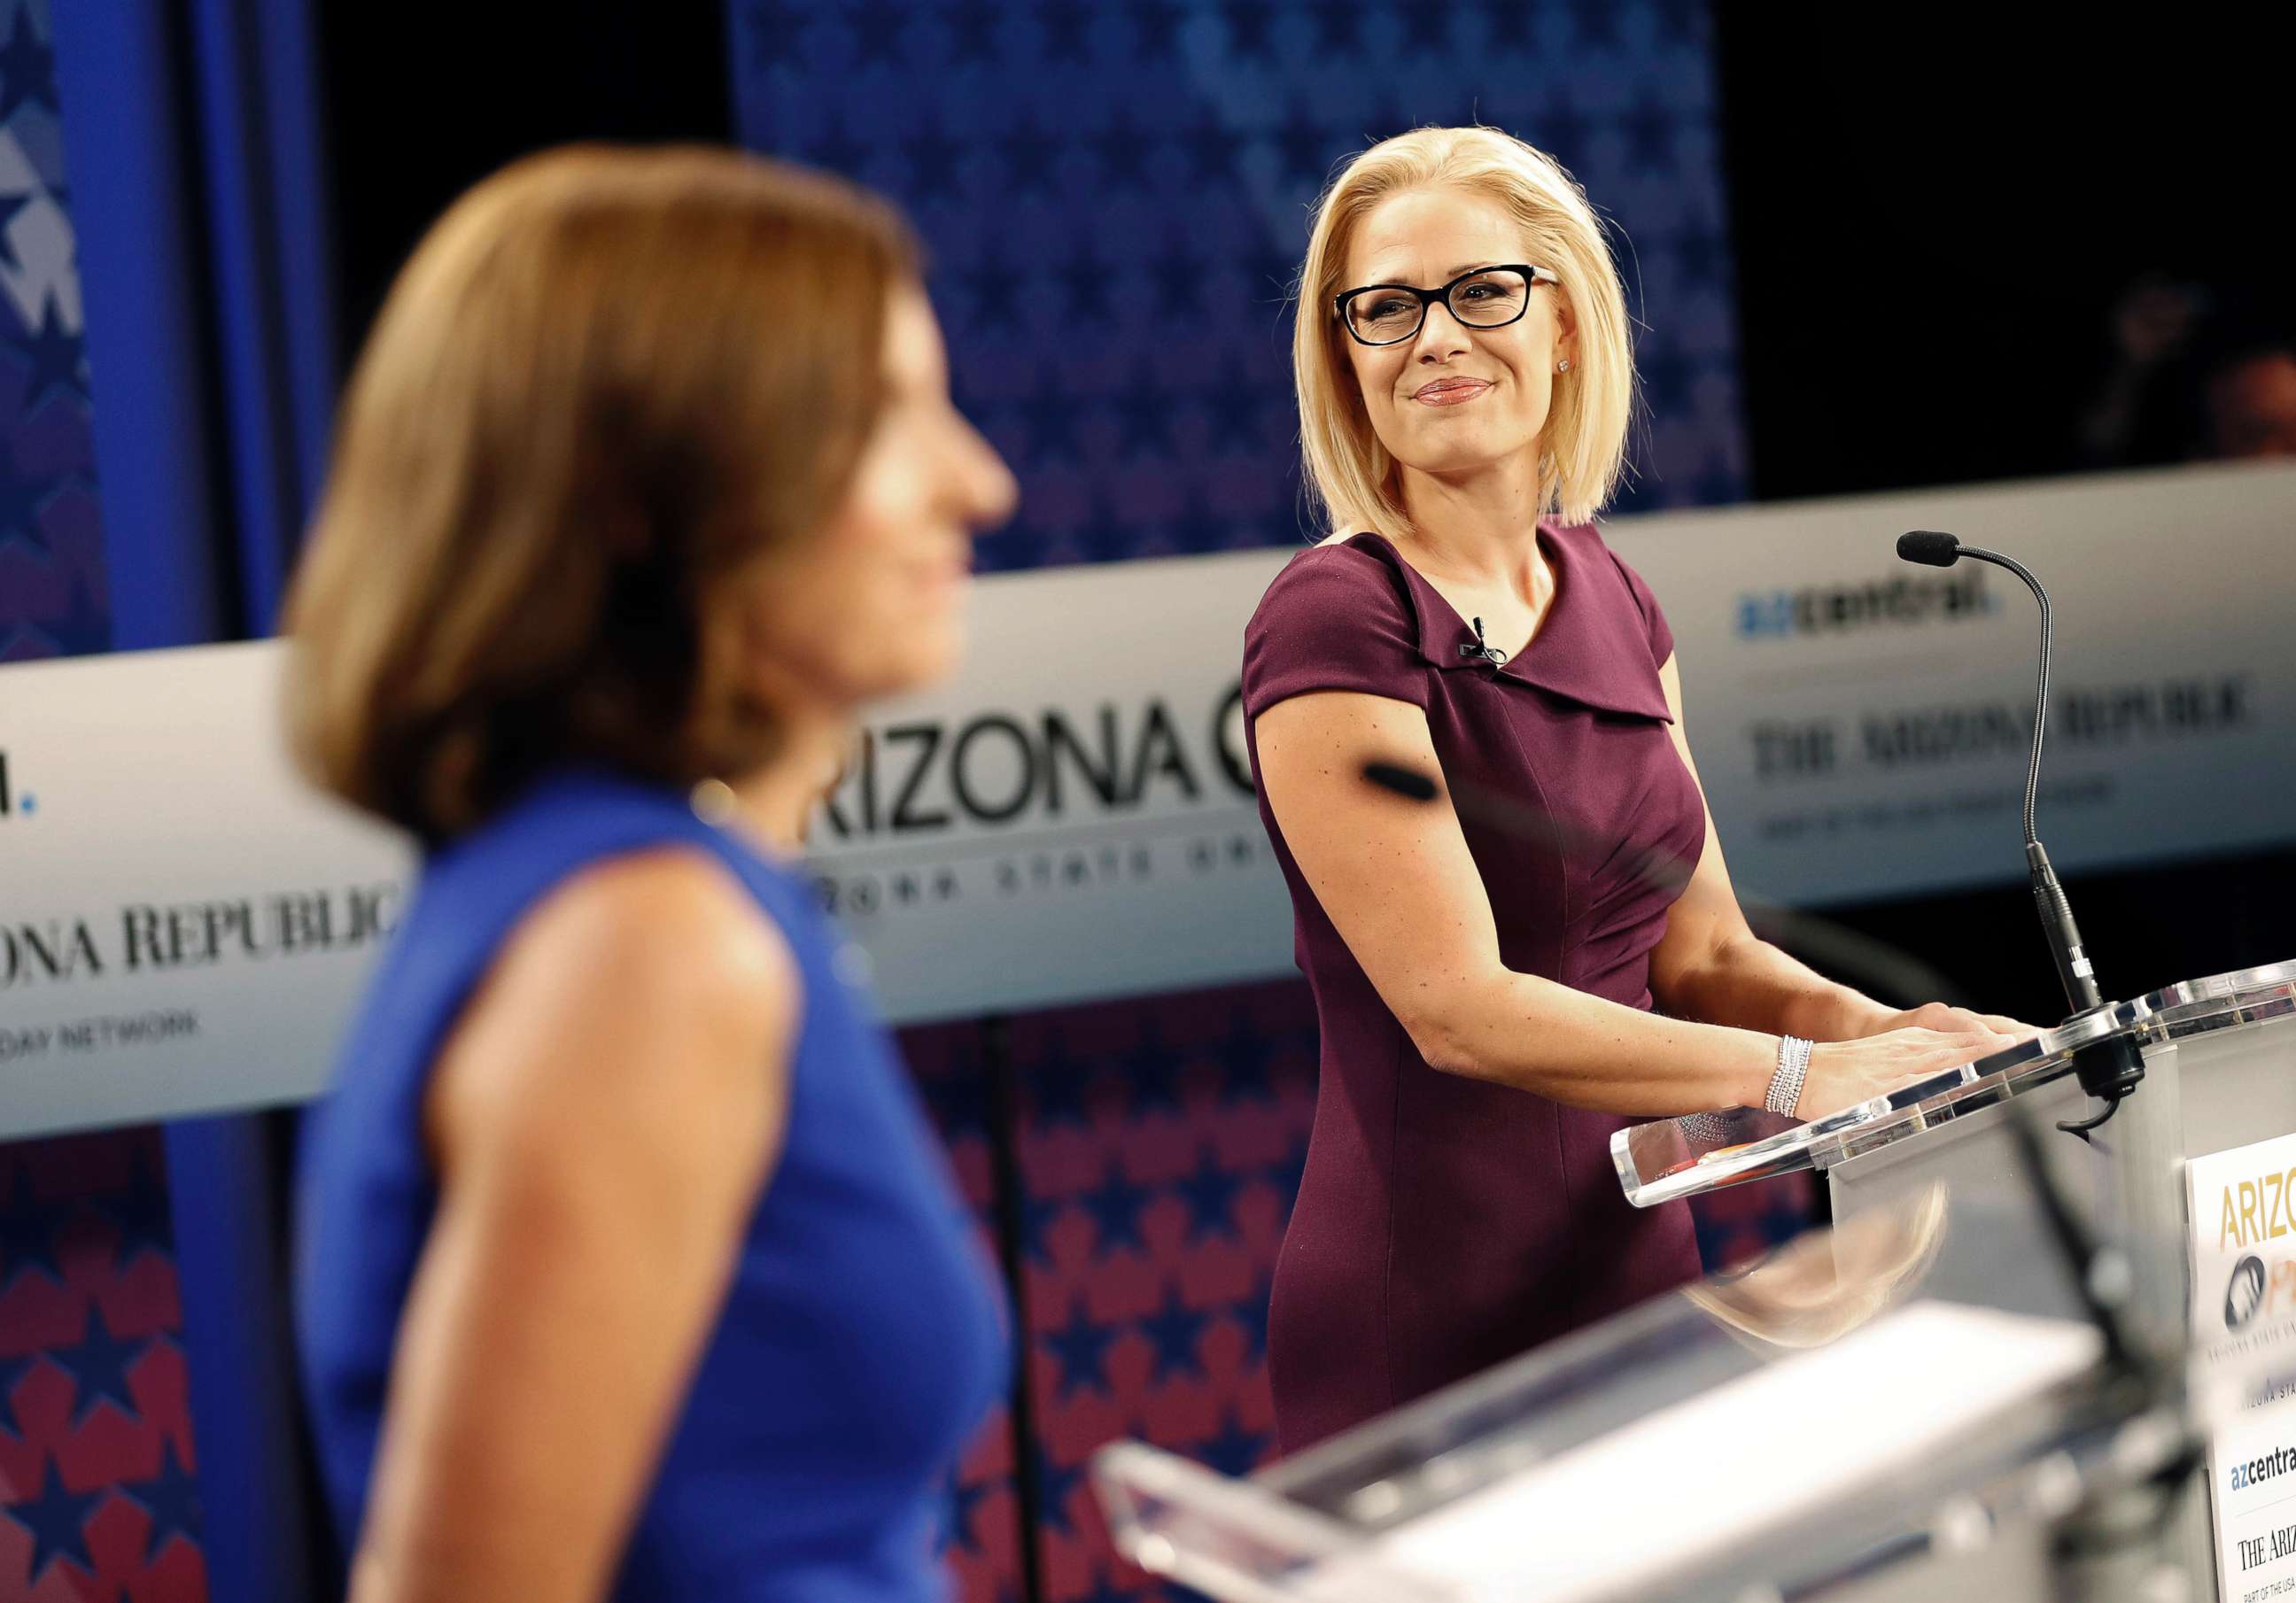 PHOTO: Senate candidates Rep. Martha McSally, left, and Rep. Kyrsten Sinema, prepare their remarks in a television studio prior to a televised debate, Oct. 15, 2018, in Phoenix.